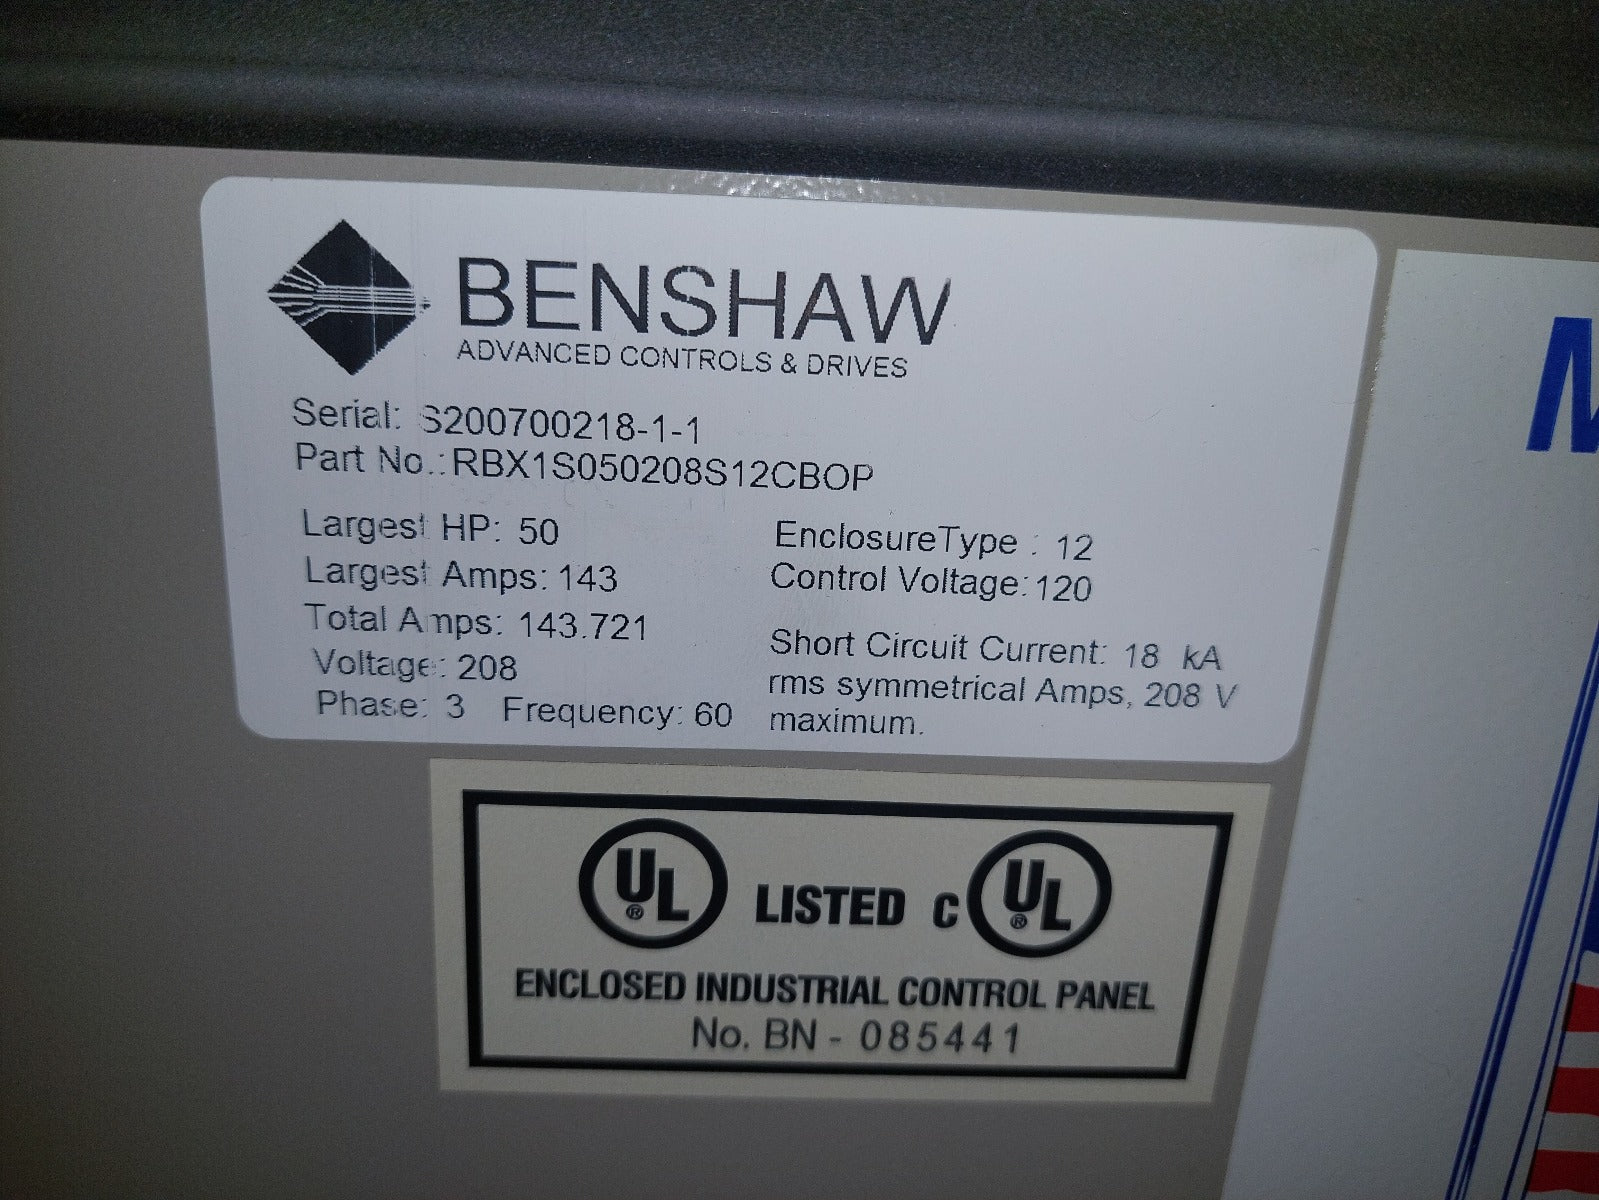 Benshaw RBX-1-S-156A-14C, 50HP Soft Starter S200700218-1-1, 208V, 143A Used